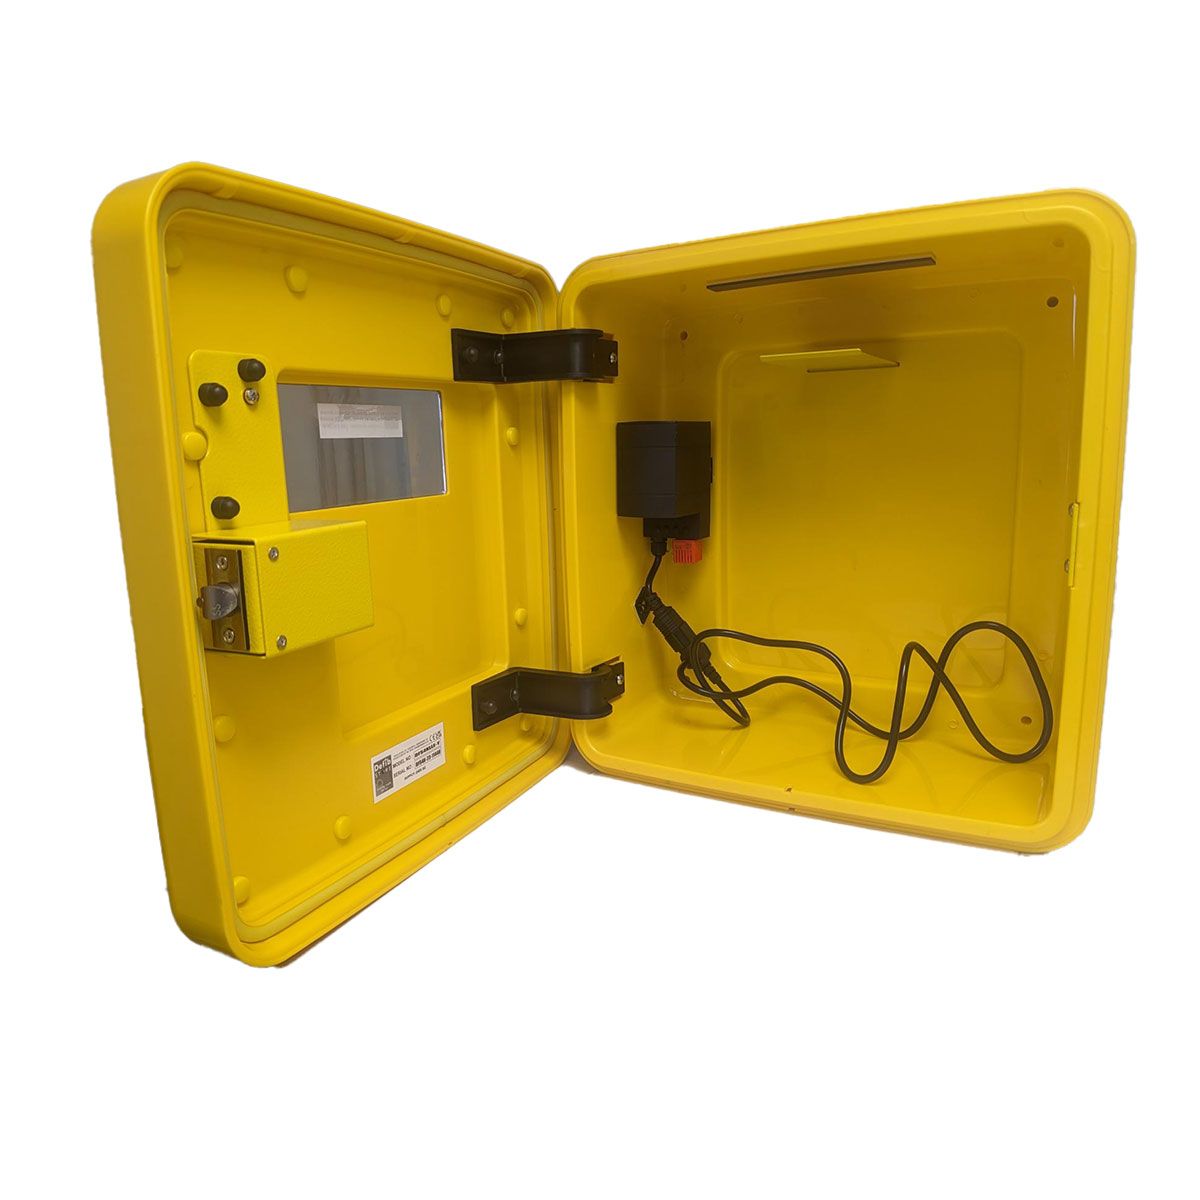 Lifesaver Cabinet for defibrillator and PAcT first aid kit